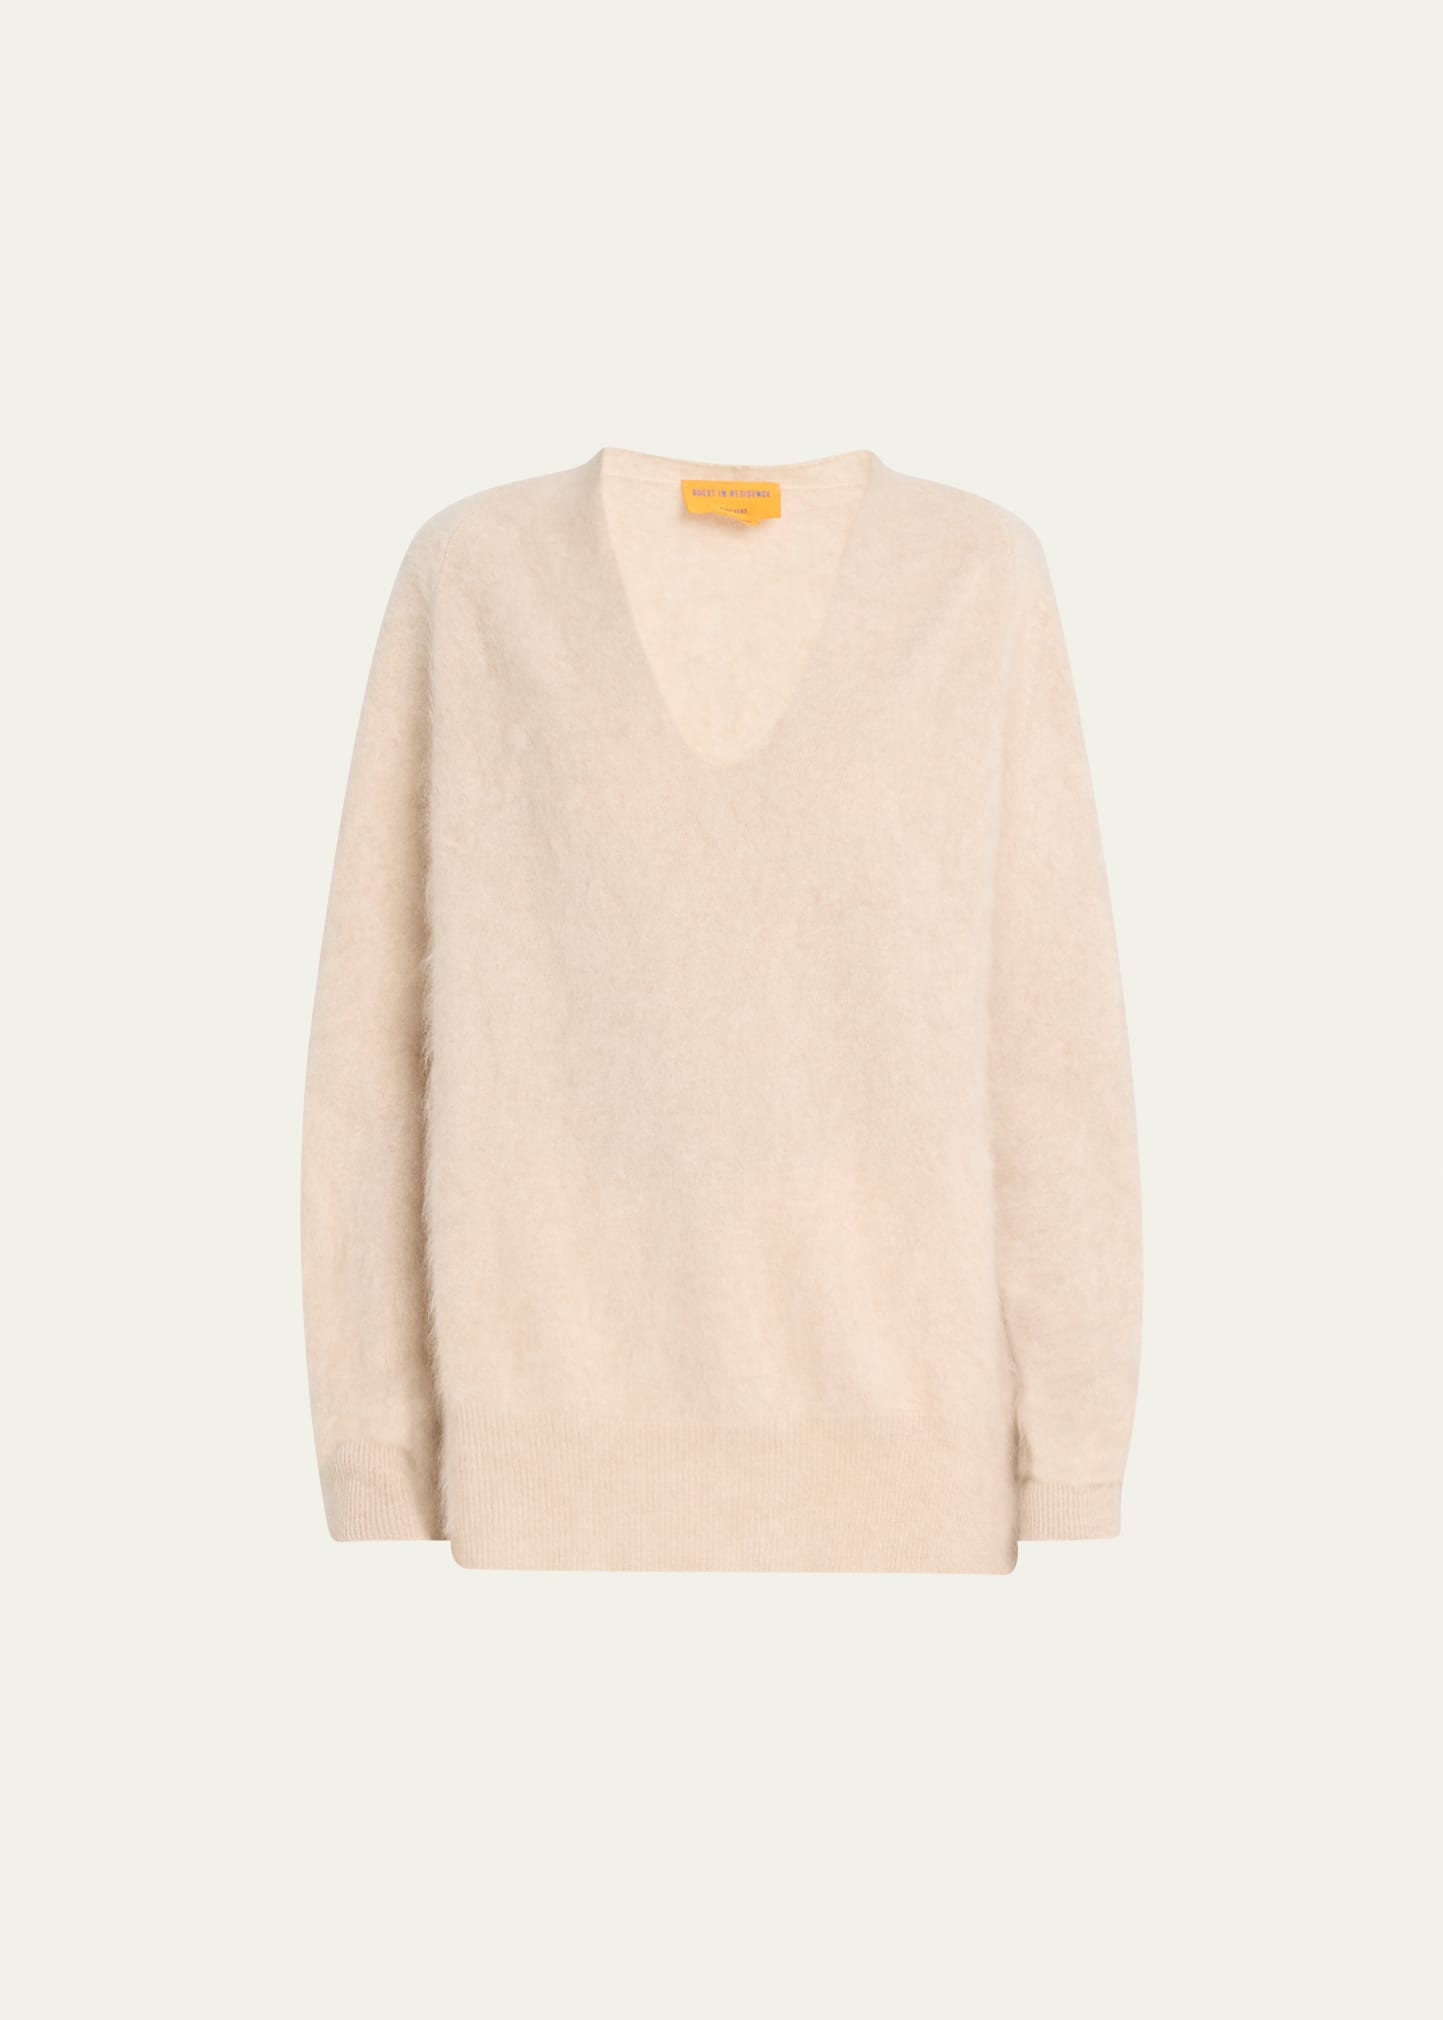 Grizzly Cashmere V-Neck Sweater